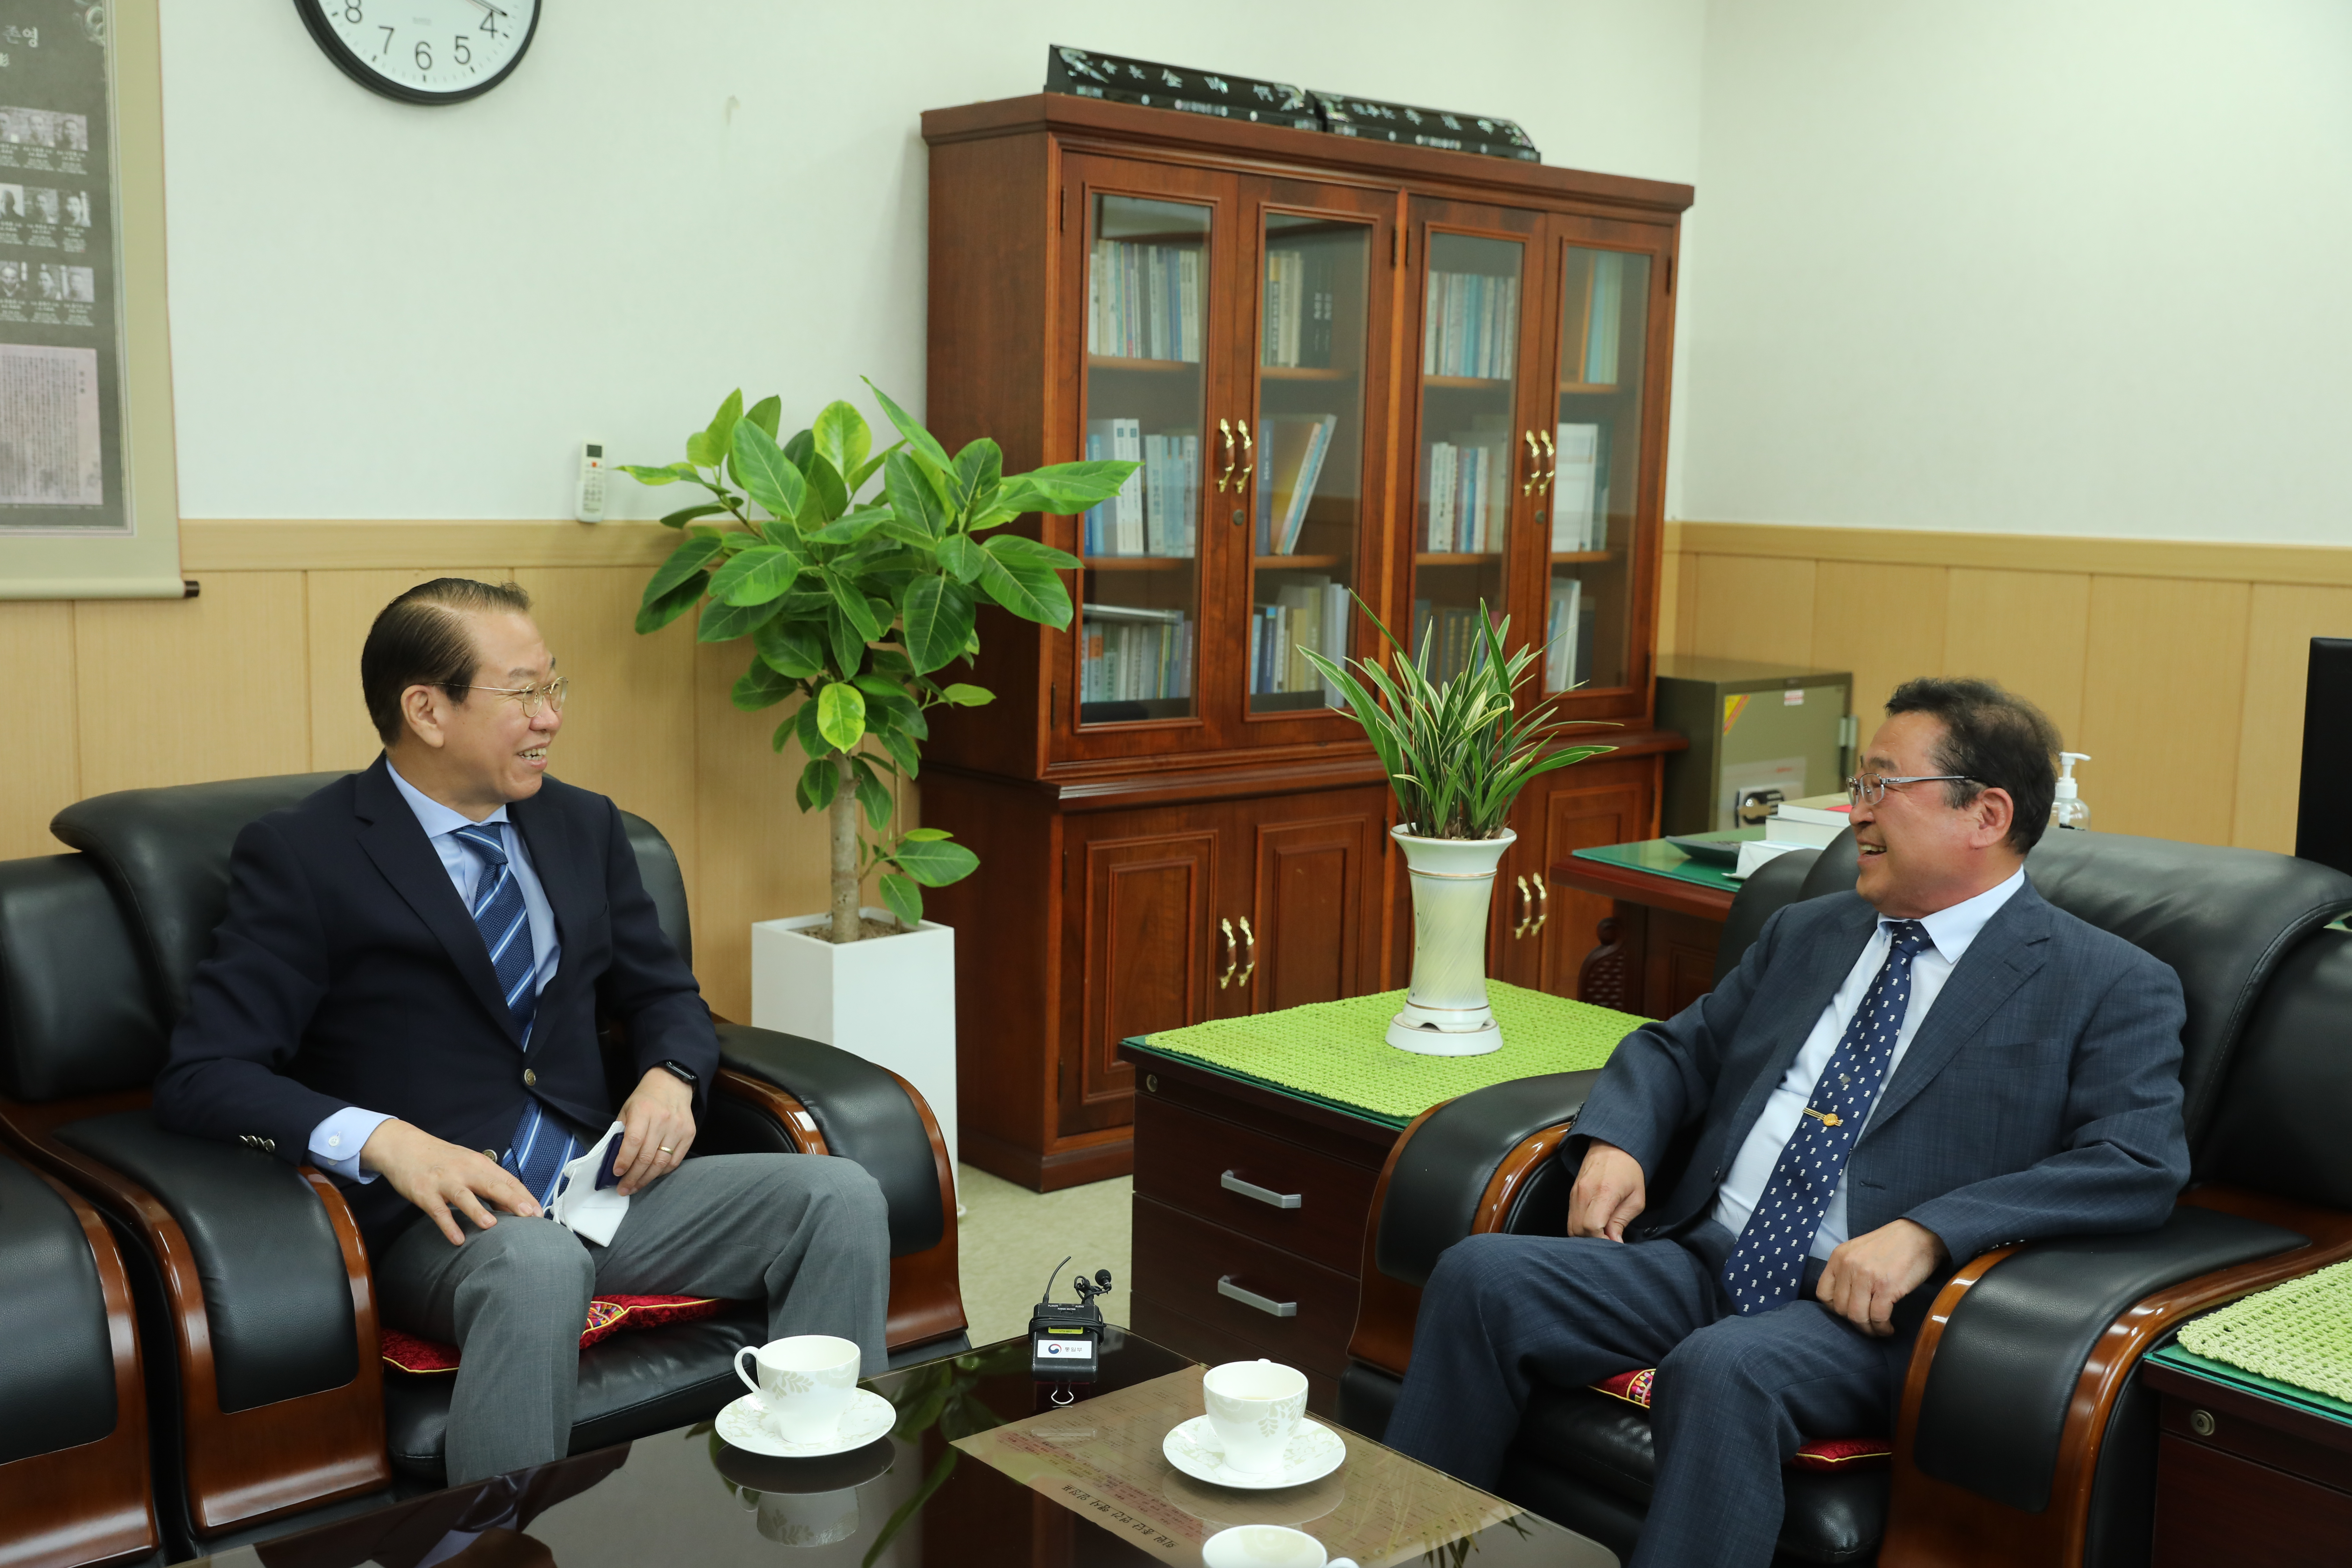 Unification Minister Kwon Youngse Pays Courtesy Visit to Kim Ryoung-ha, Head of the Association of Korean Native Religions